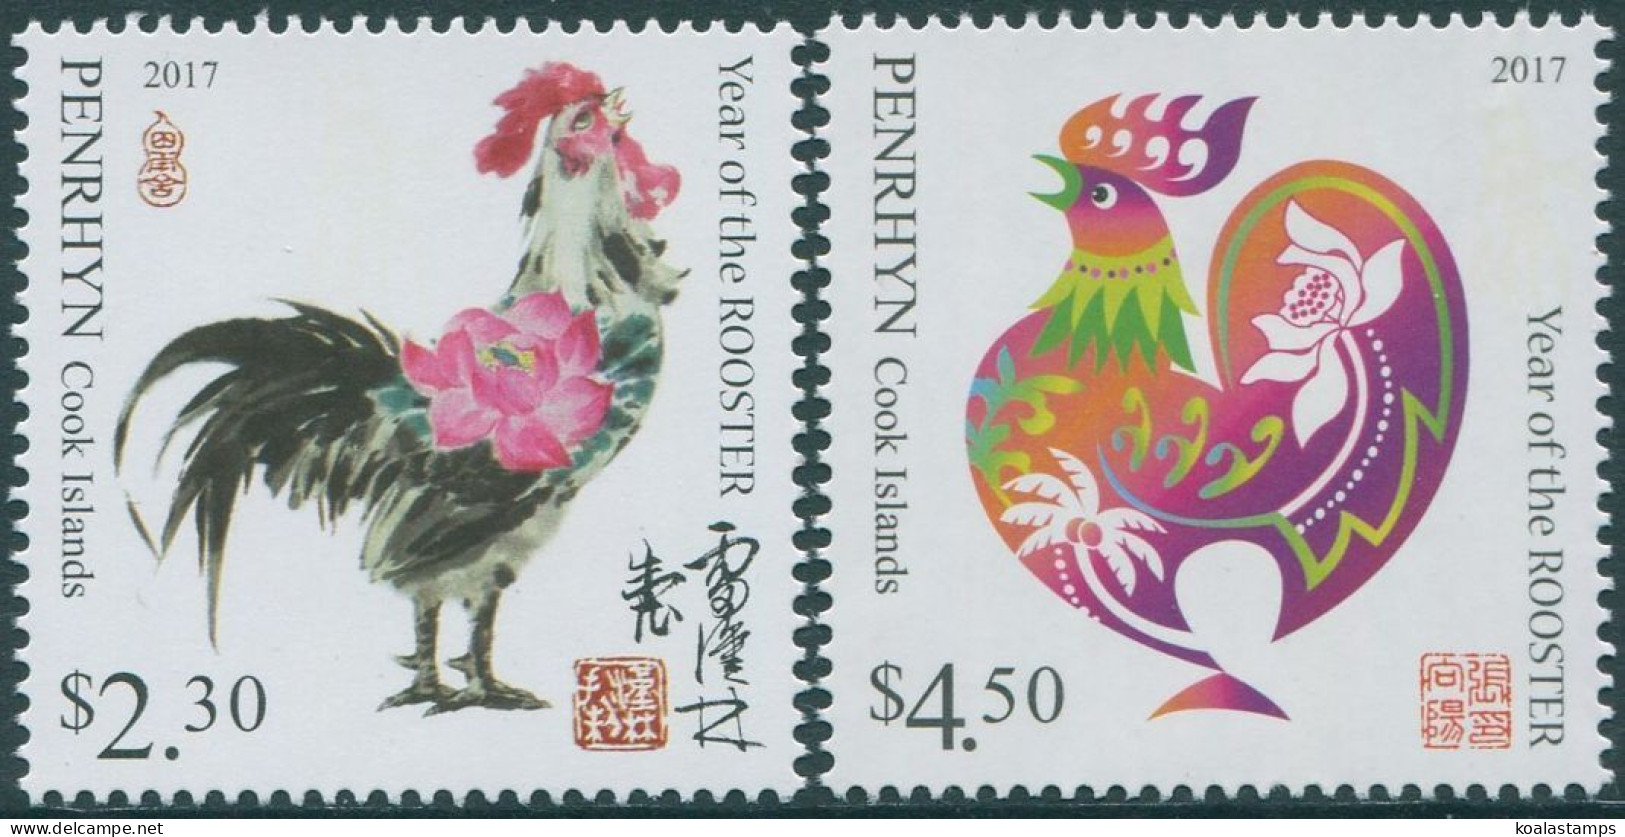 Cook Islands Penrhyn 2016 SG671-672 Year Of The Rooster Set MNH - Penrhyn